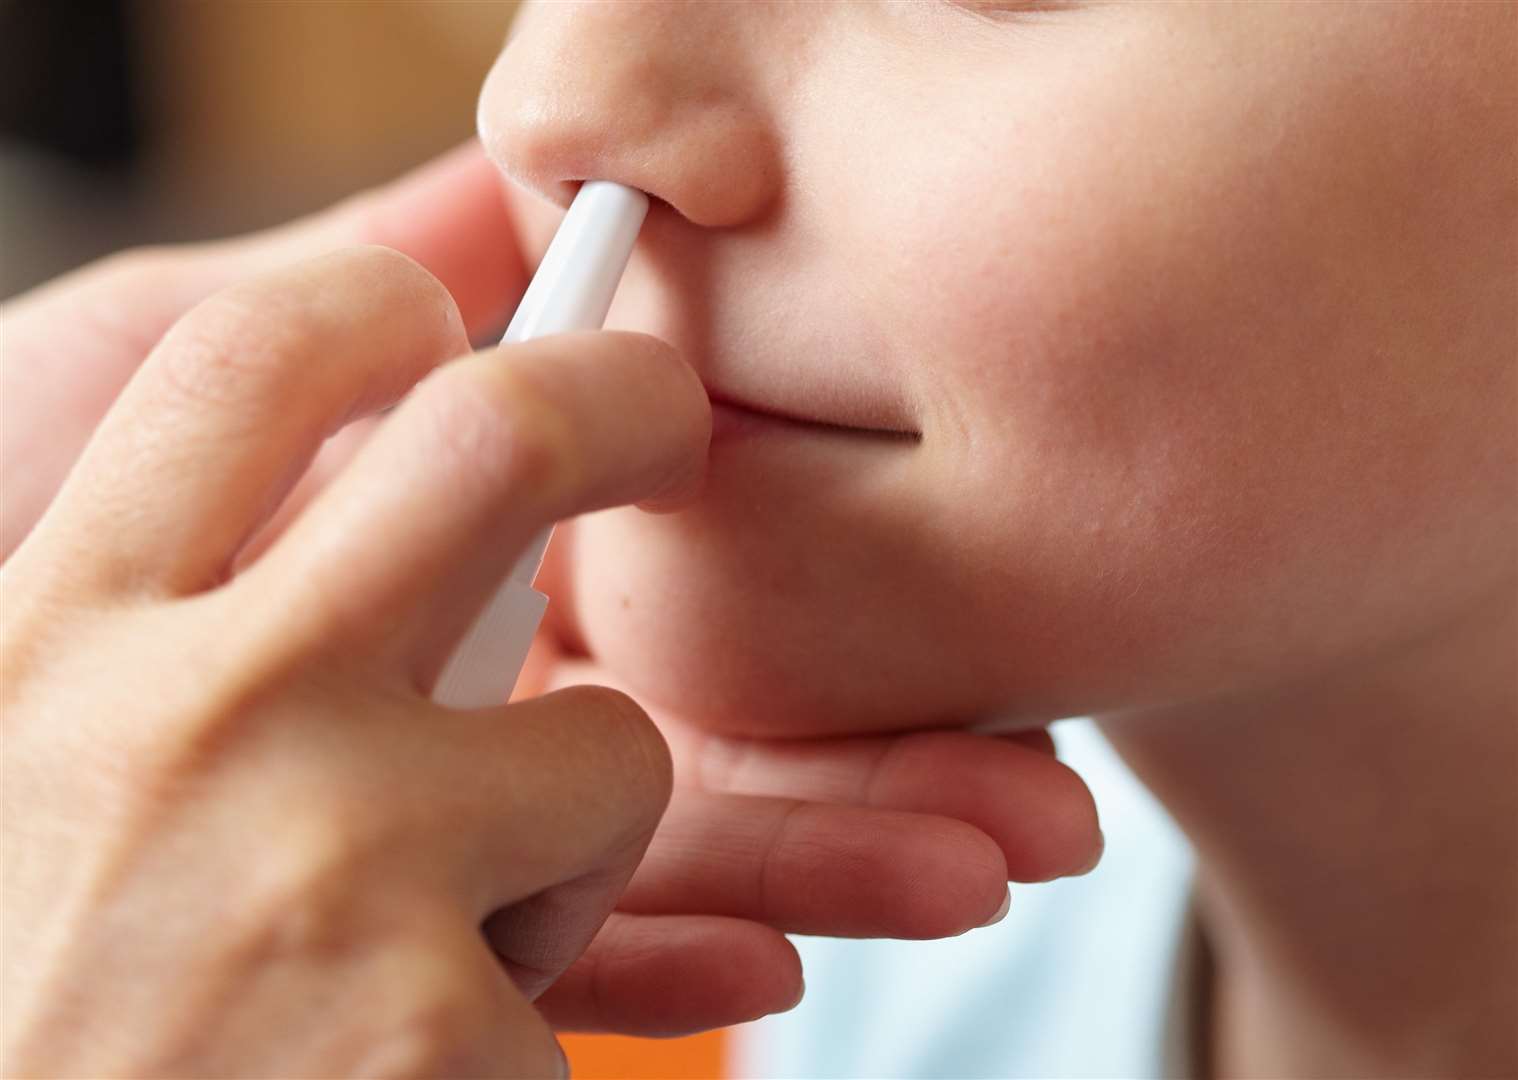 Parents are being encouraged to bring their children forward for the flu nasal spray. Image: Stock photo.